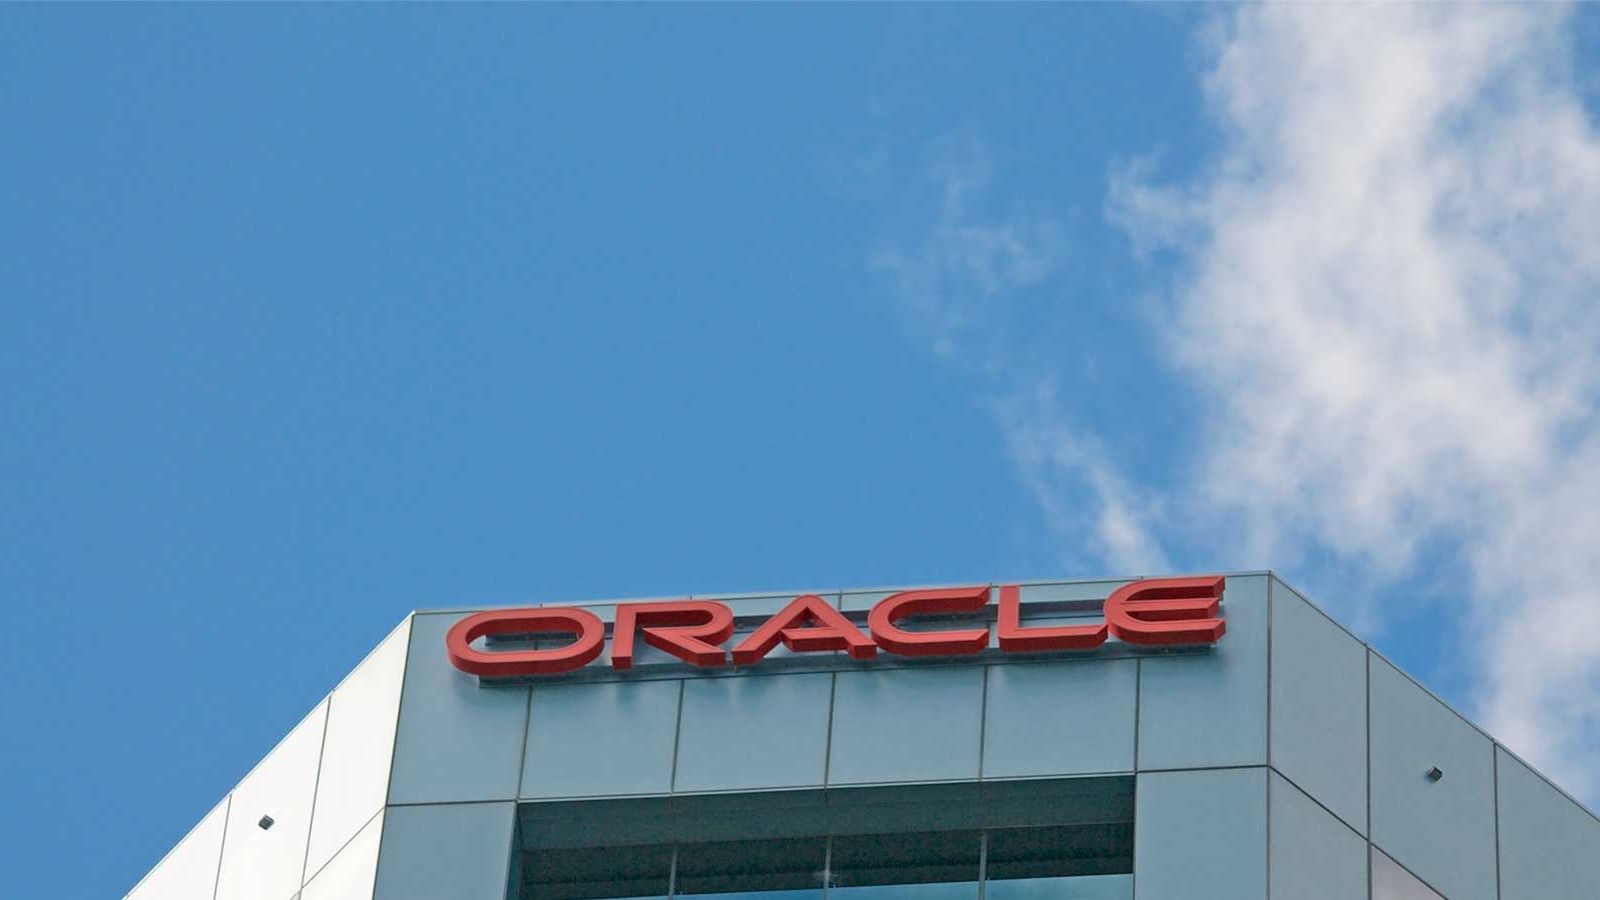 Oracle Banner